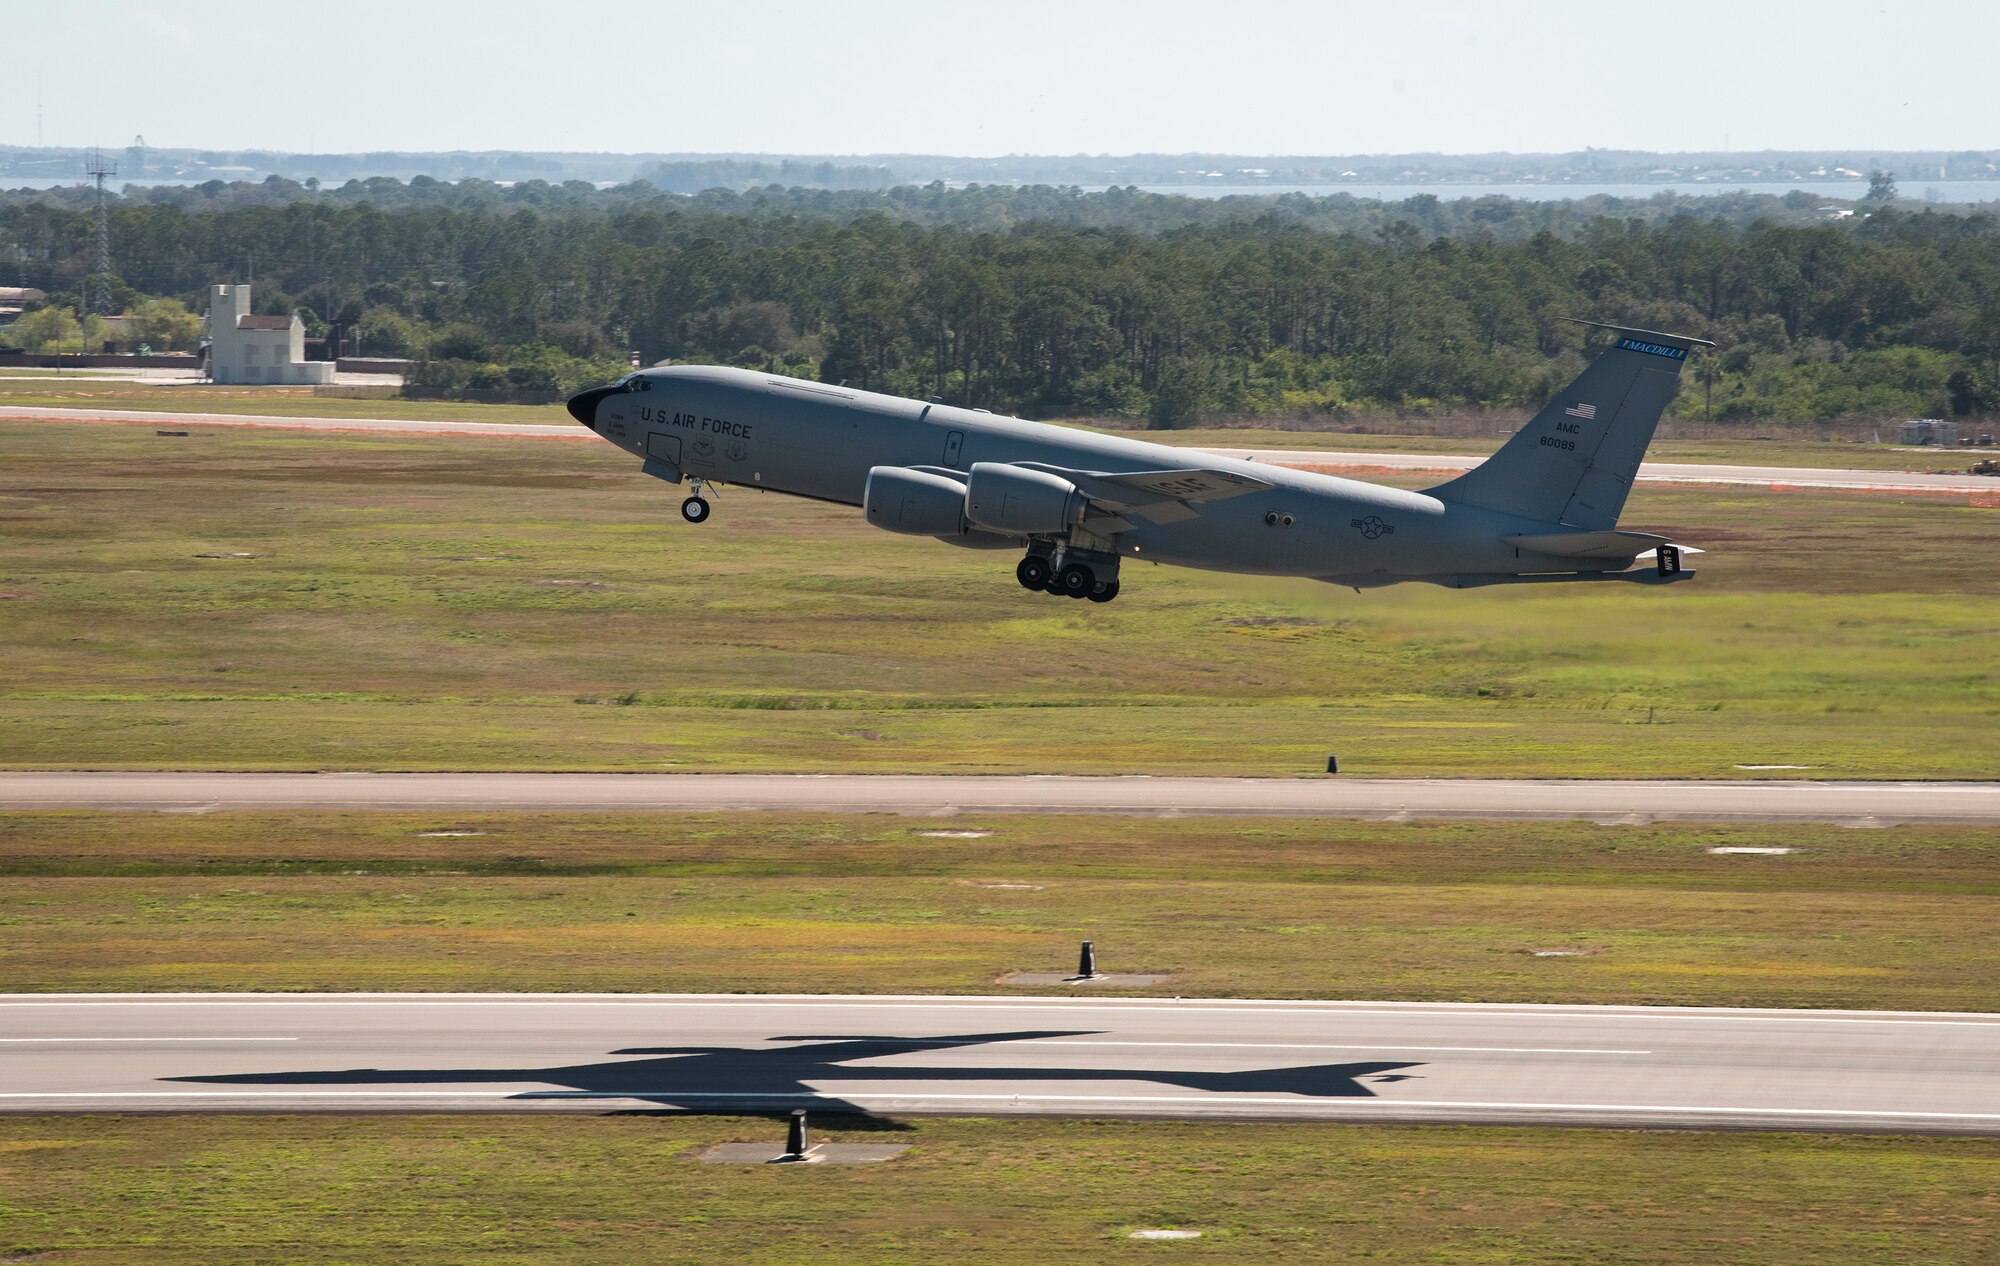 A KC-135 Stratotanker aircraft takes off from the MacDill Air Base, Fla., runway during a readiness exercise Feb. 10, 2019. Total force Airmen from the 6th Air Mobility Wing and 927th Air Refueling Wing participated in the three-day exercise emphasizing the importance of contingency operations training.